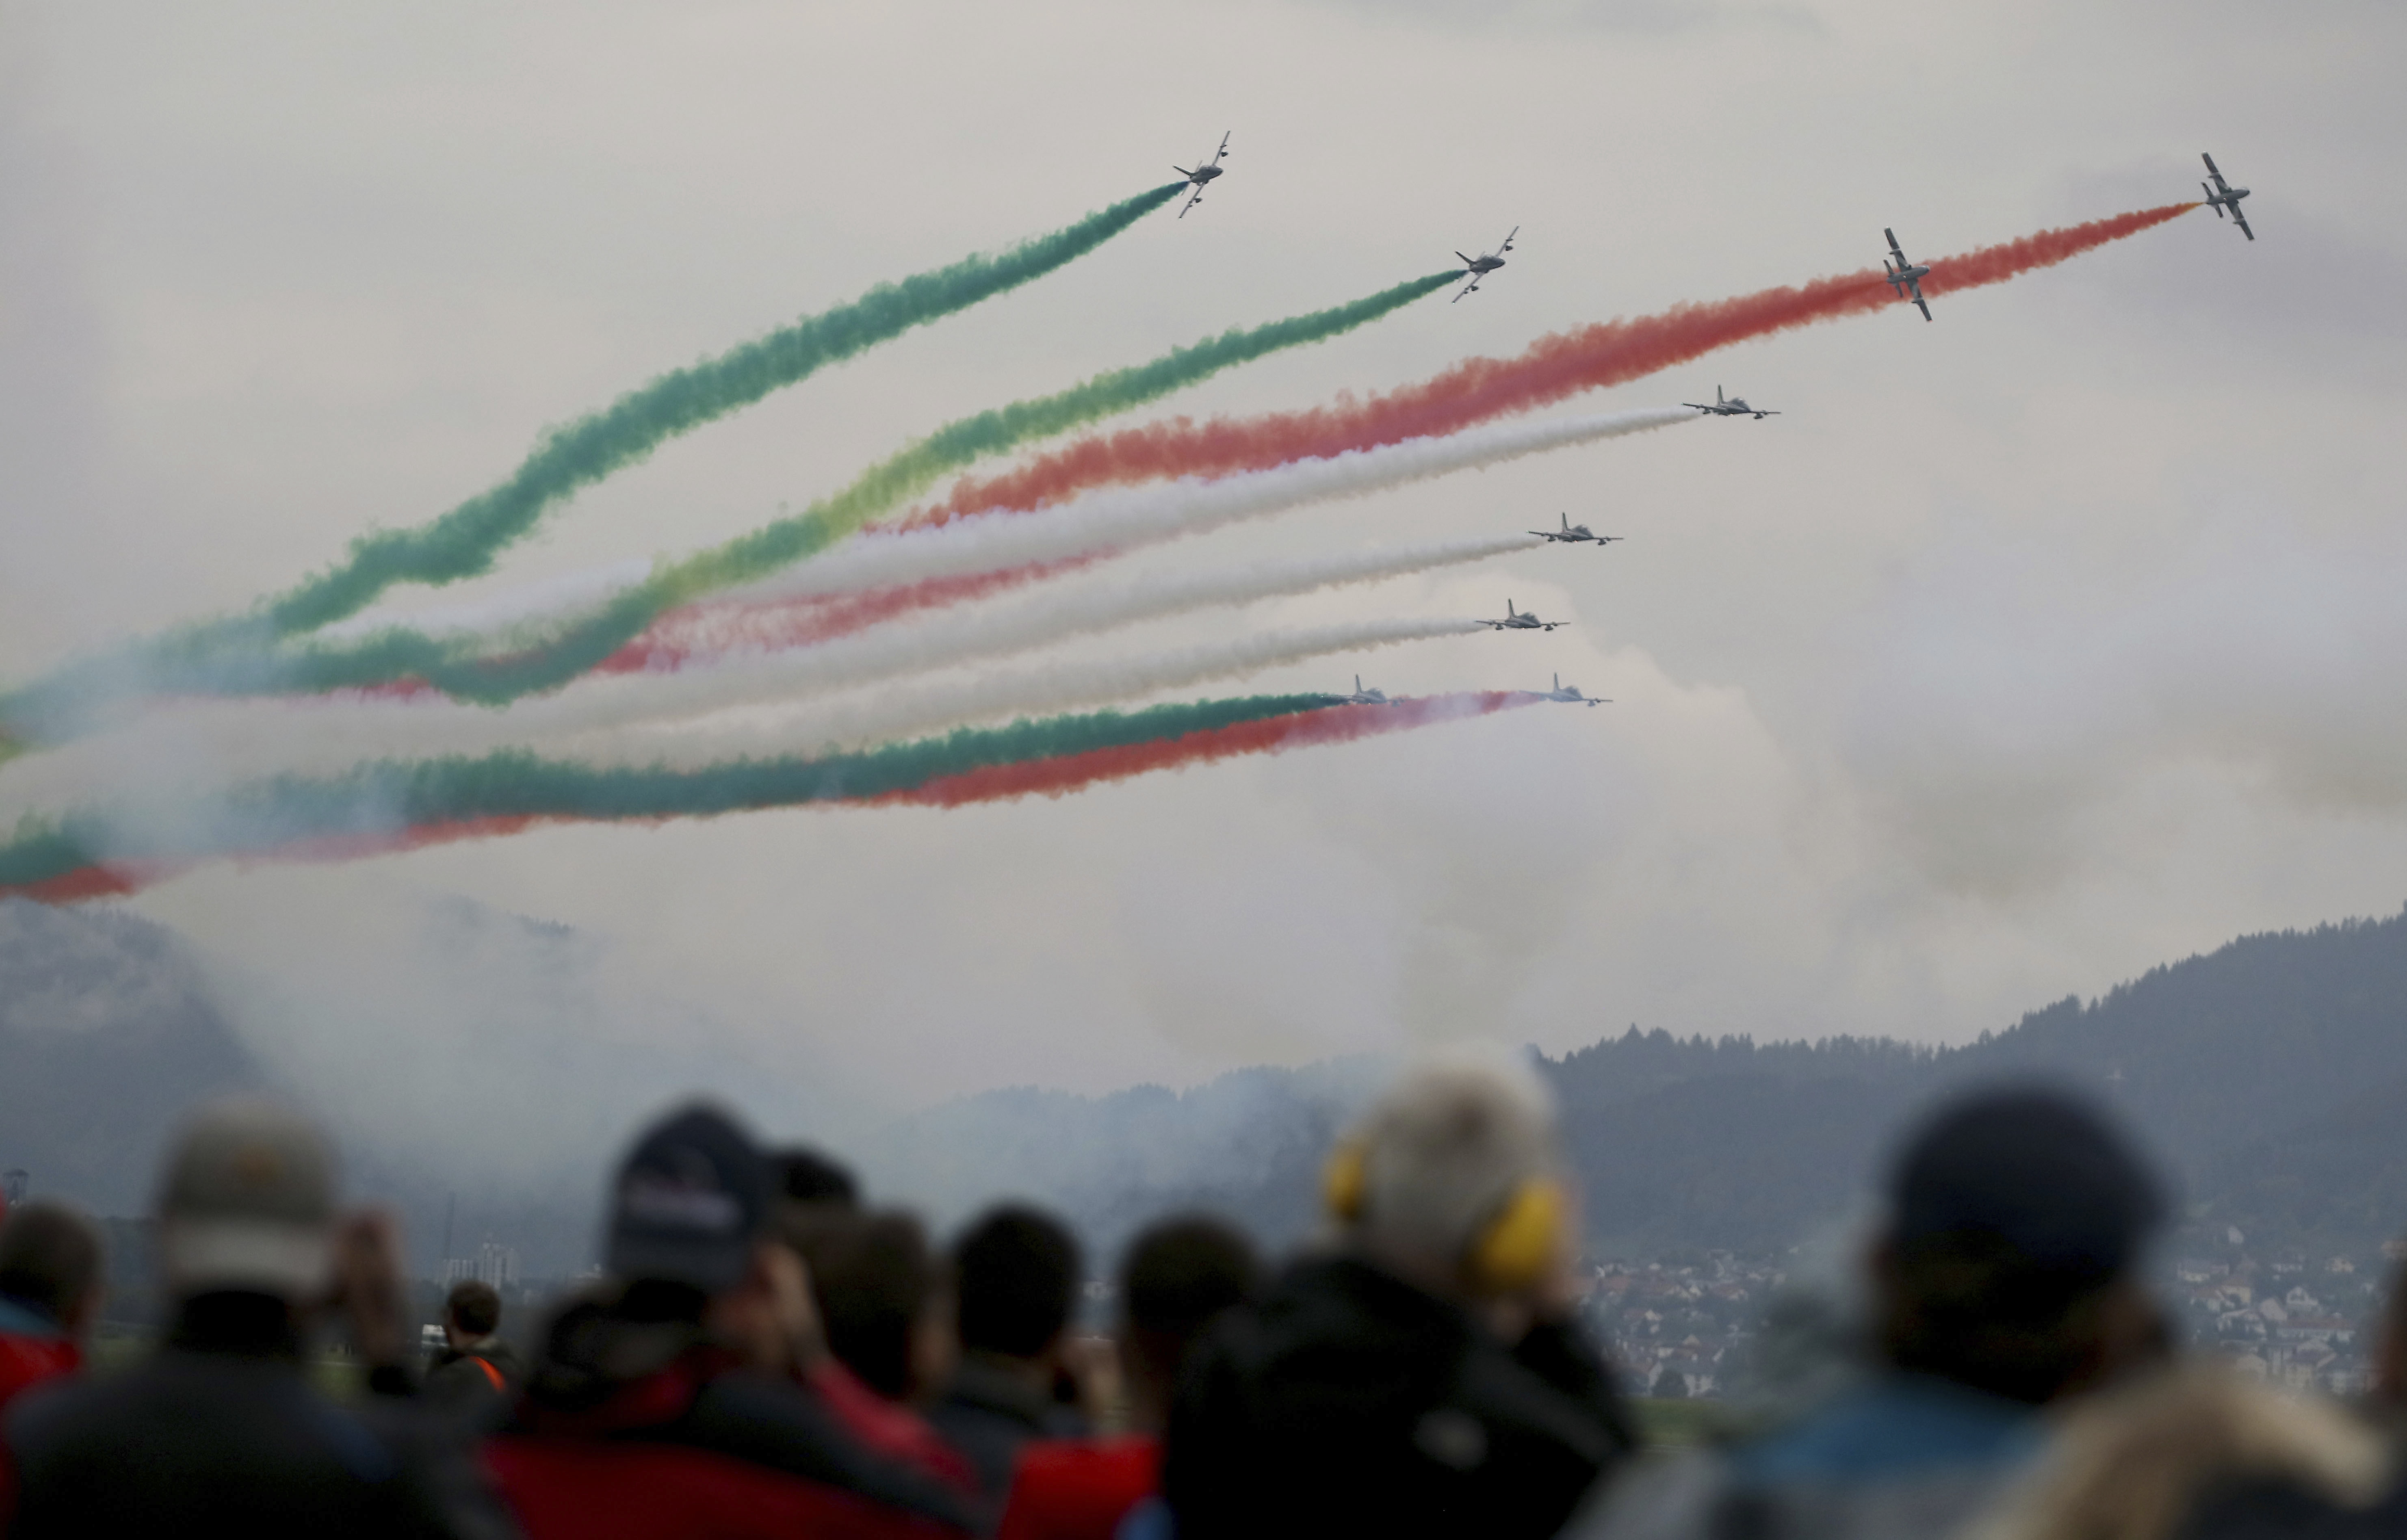 The Frecce Tricolori Italian Air Force aerobatic team performs during the Airpower 19 airplane show in Zeltweg, Styria, Austria, Friday, Sept. 6, 2019. (AP Photo/Ronald Zak)